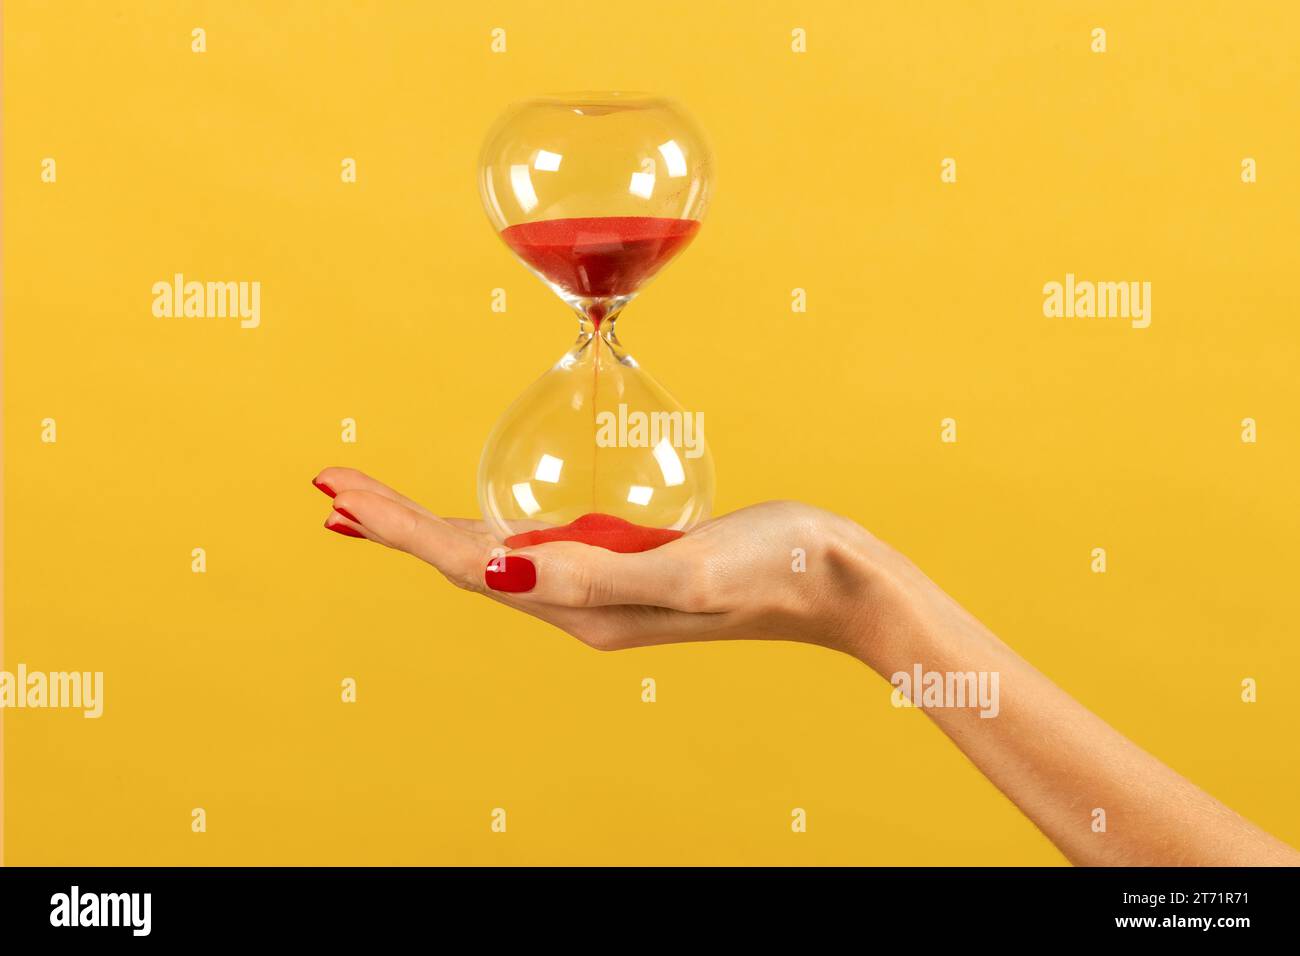 Anonymous young slim female hand with slender fingers and nails polished holding time pass transparent hourglass with red sand in palm against yellow Stock Photo